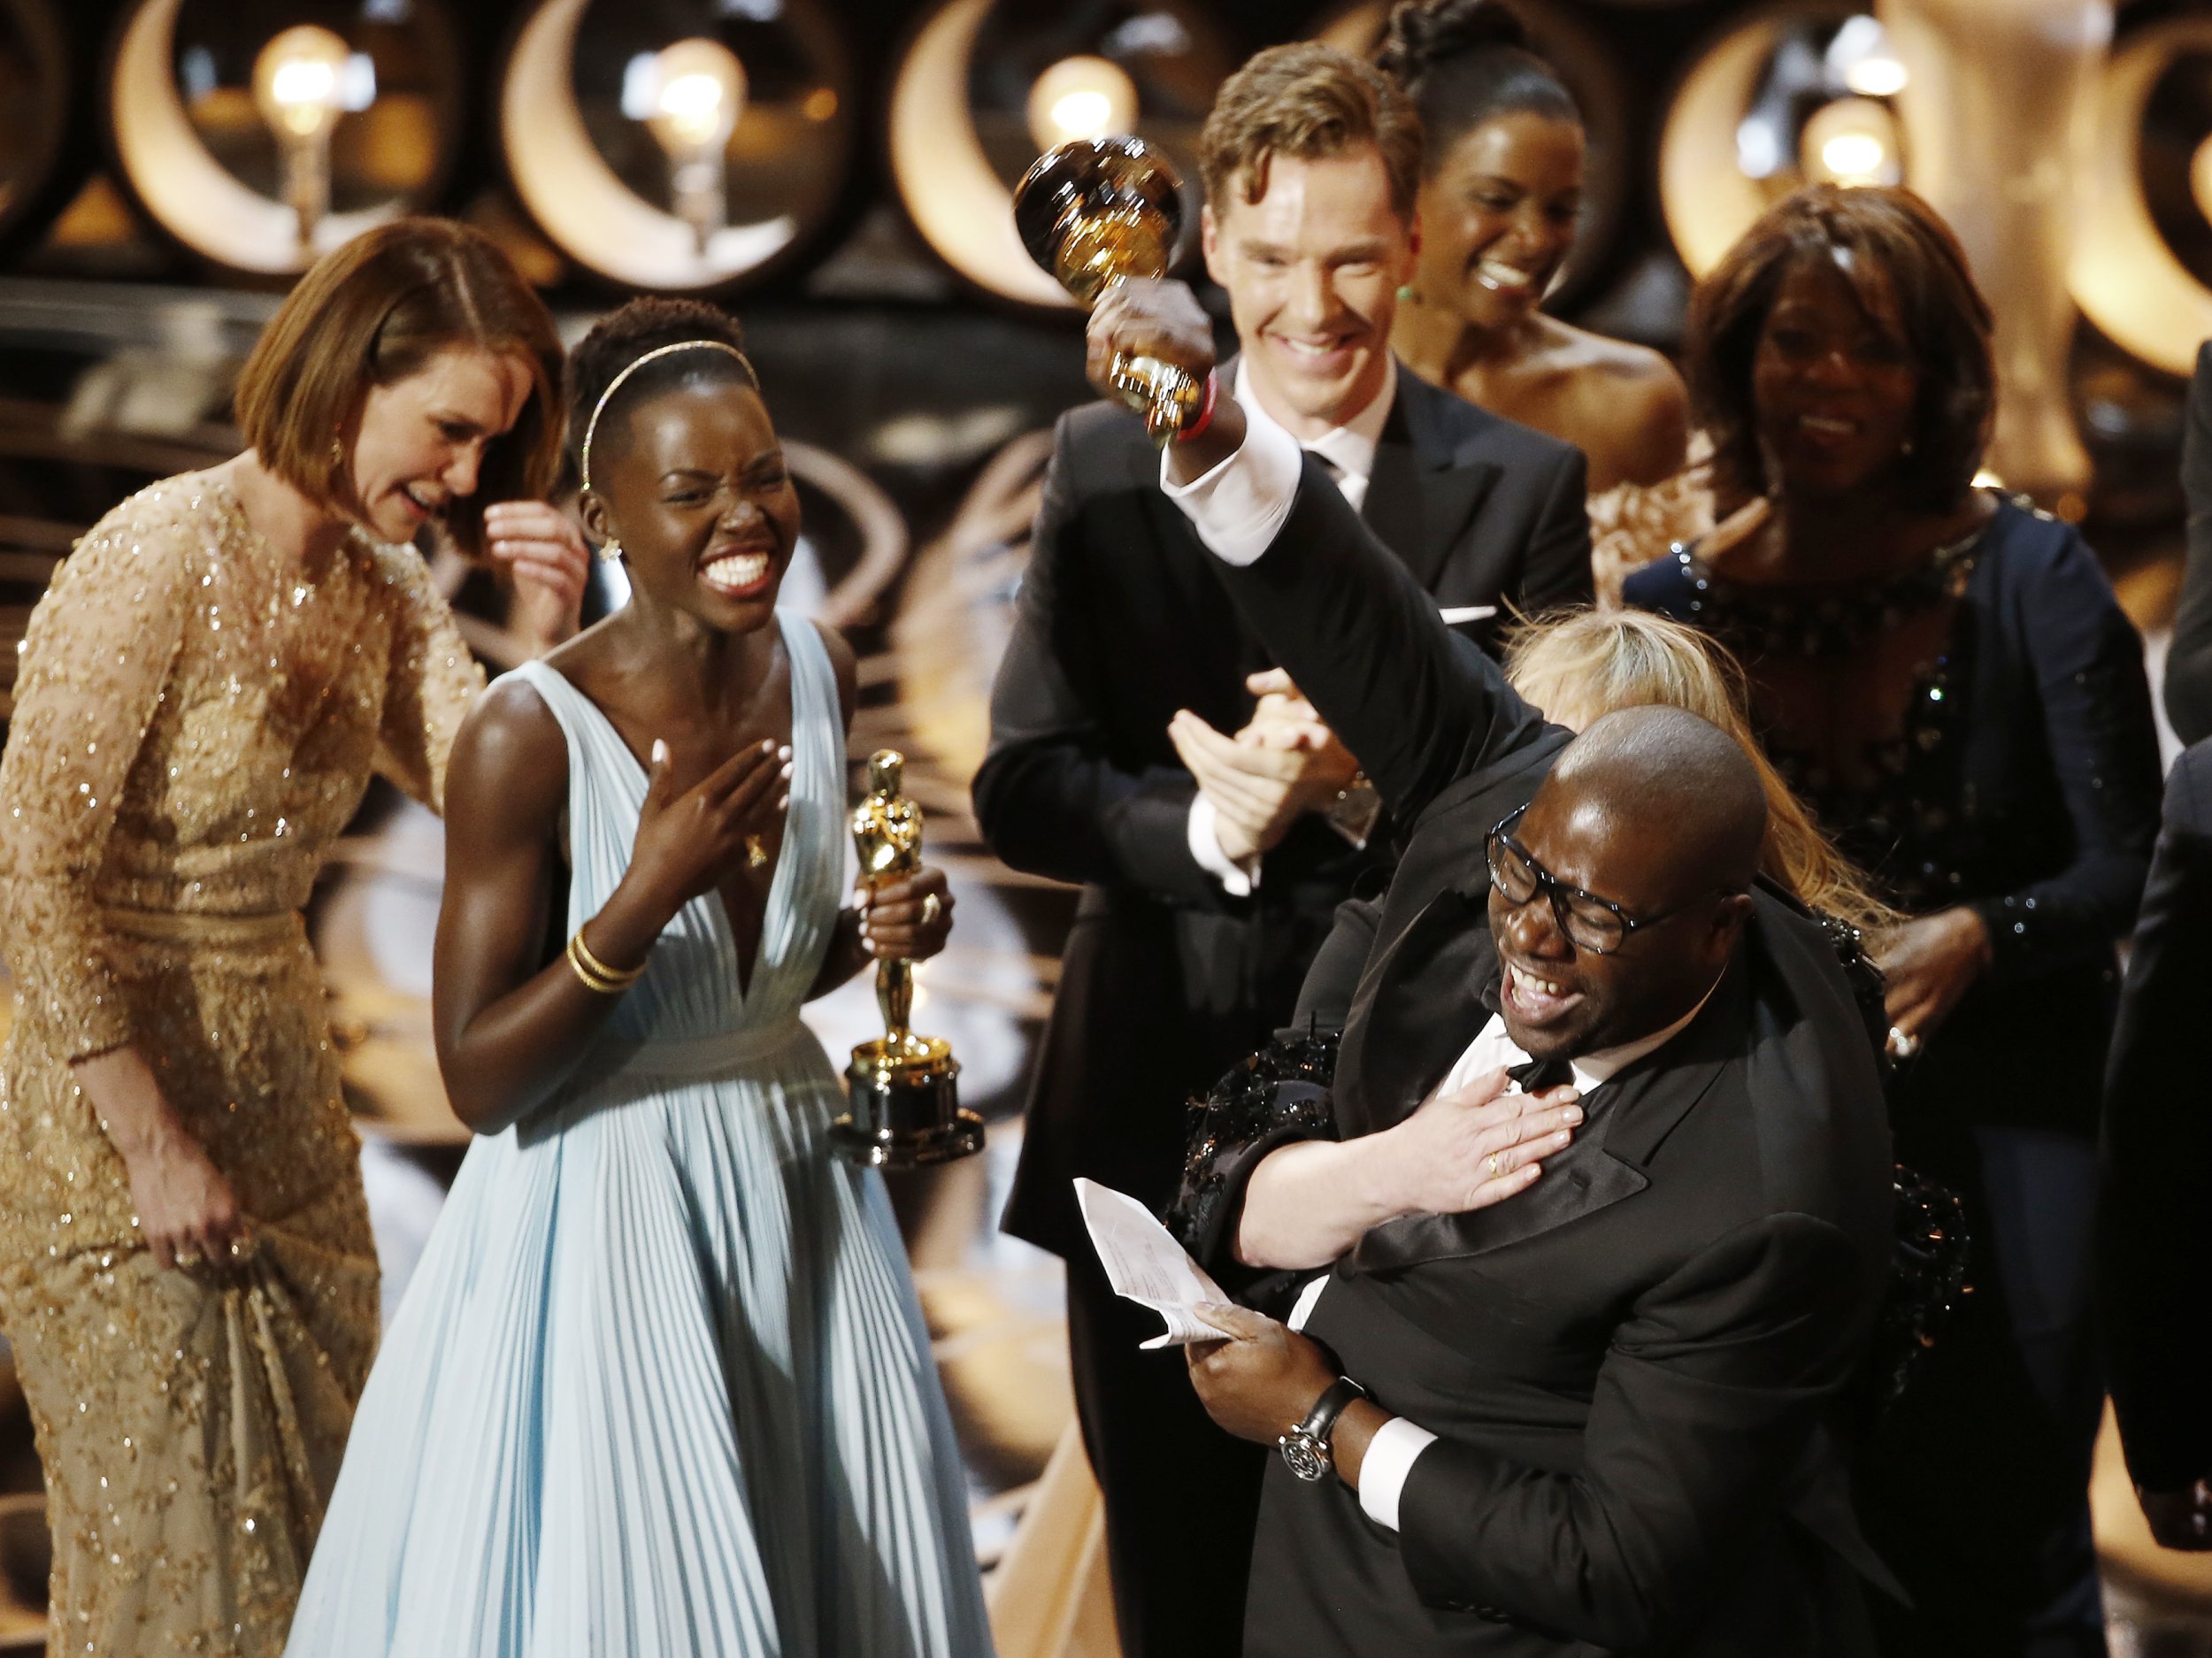 12 Years A Slave Won Best Picture At 2014 Oscars See Full List Of Winners At 86th Academy Awards